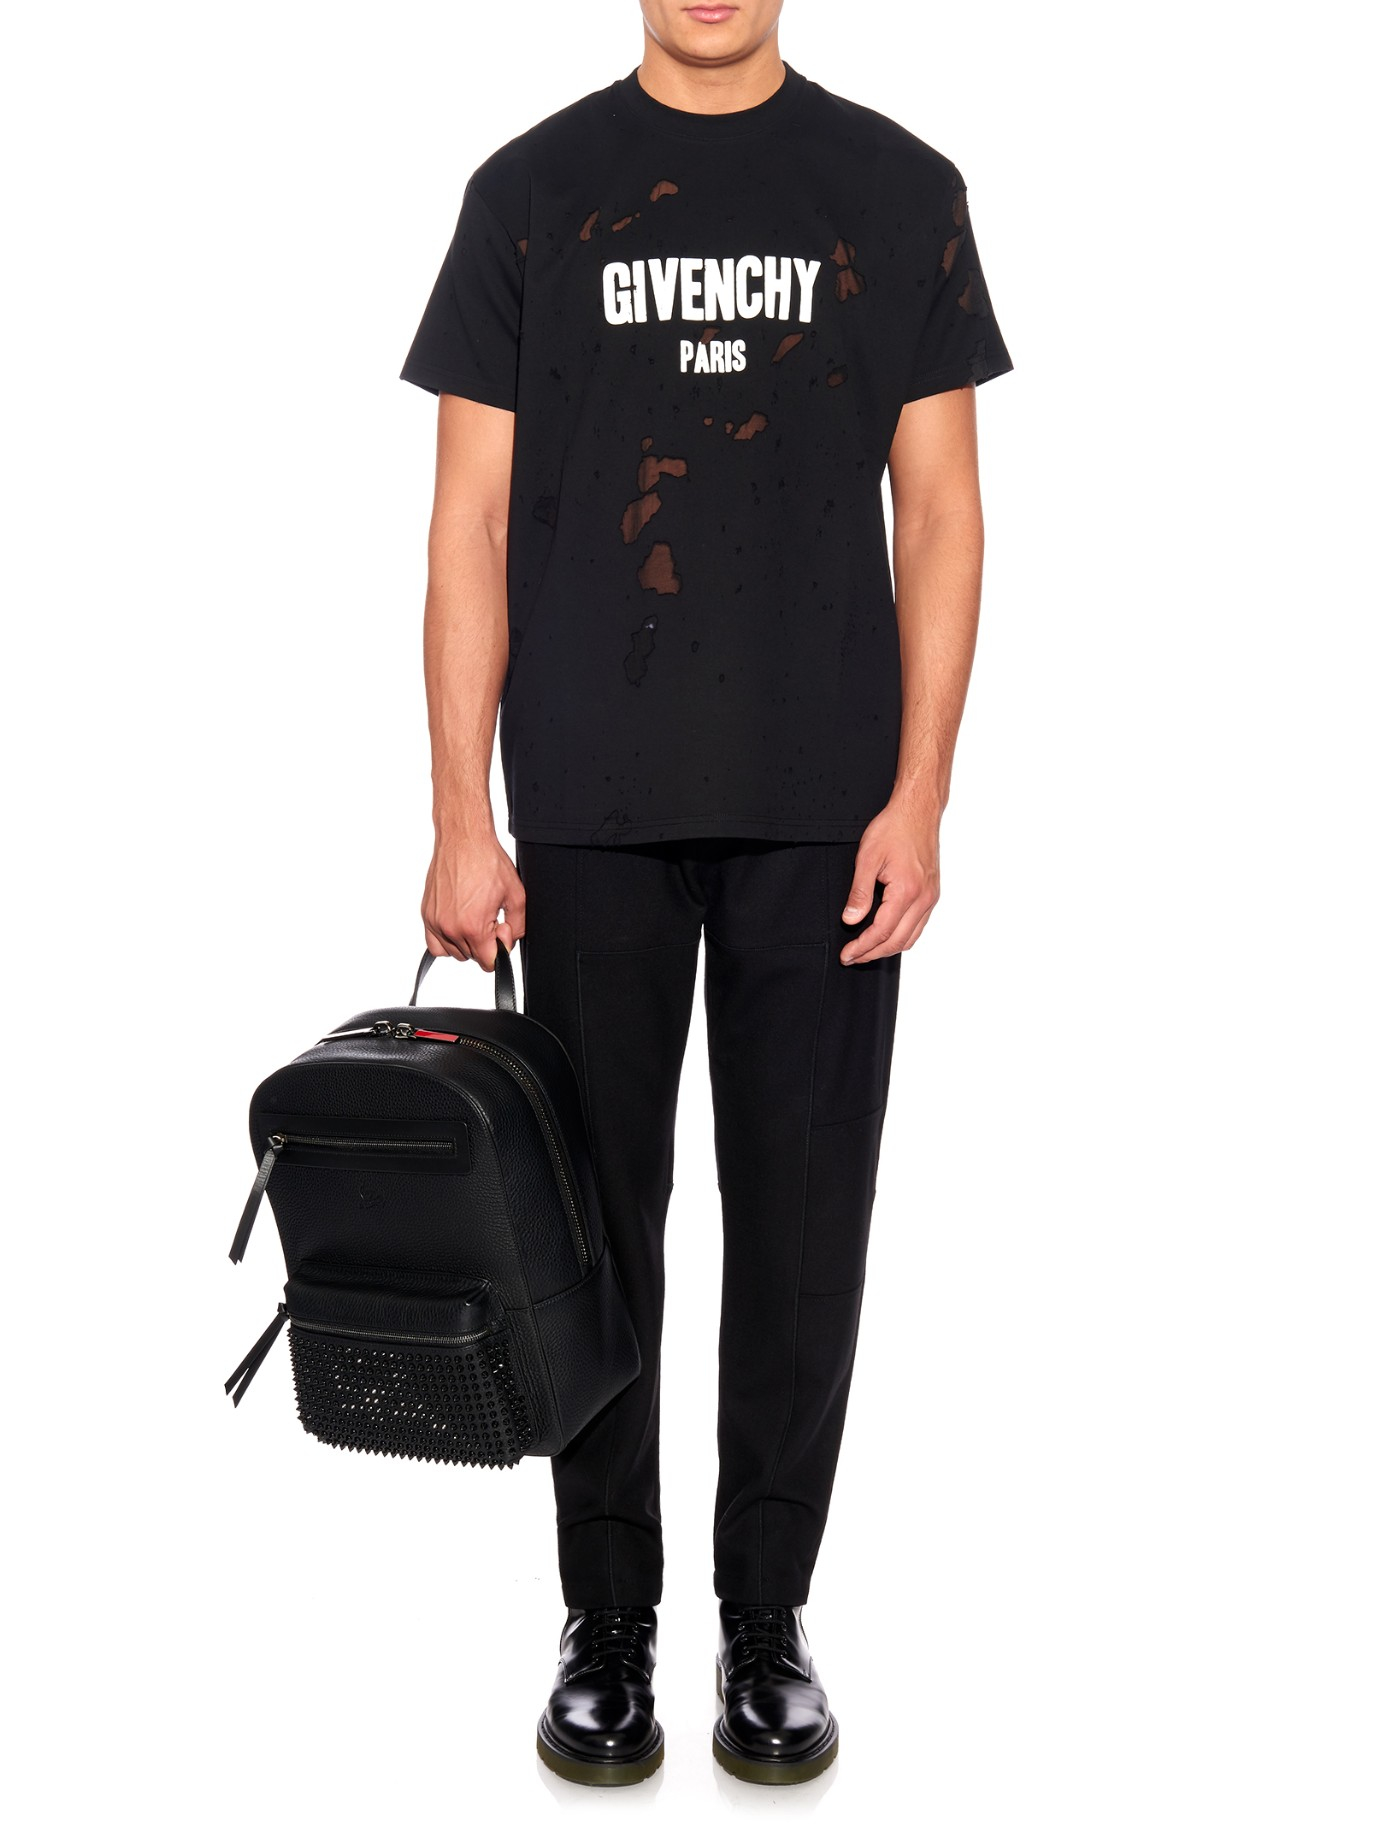 givenchy columbian fit